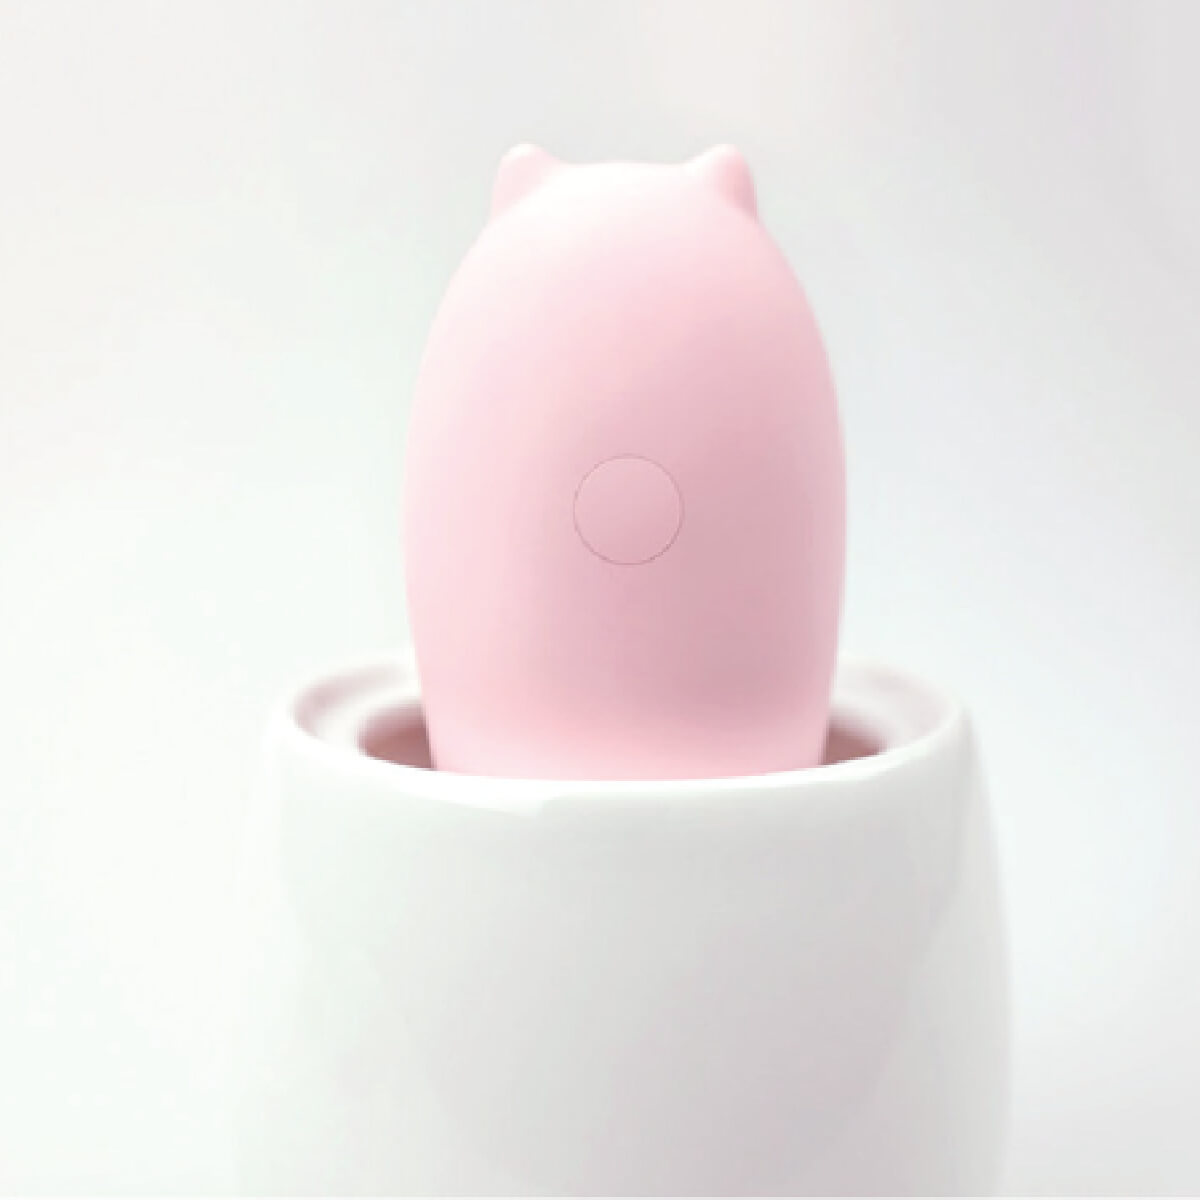 The number two Vibrava Selects product - the egg vibrator Mister Devil by Monster Pub.